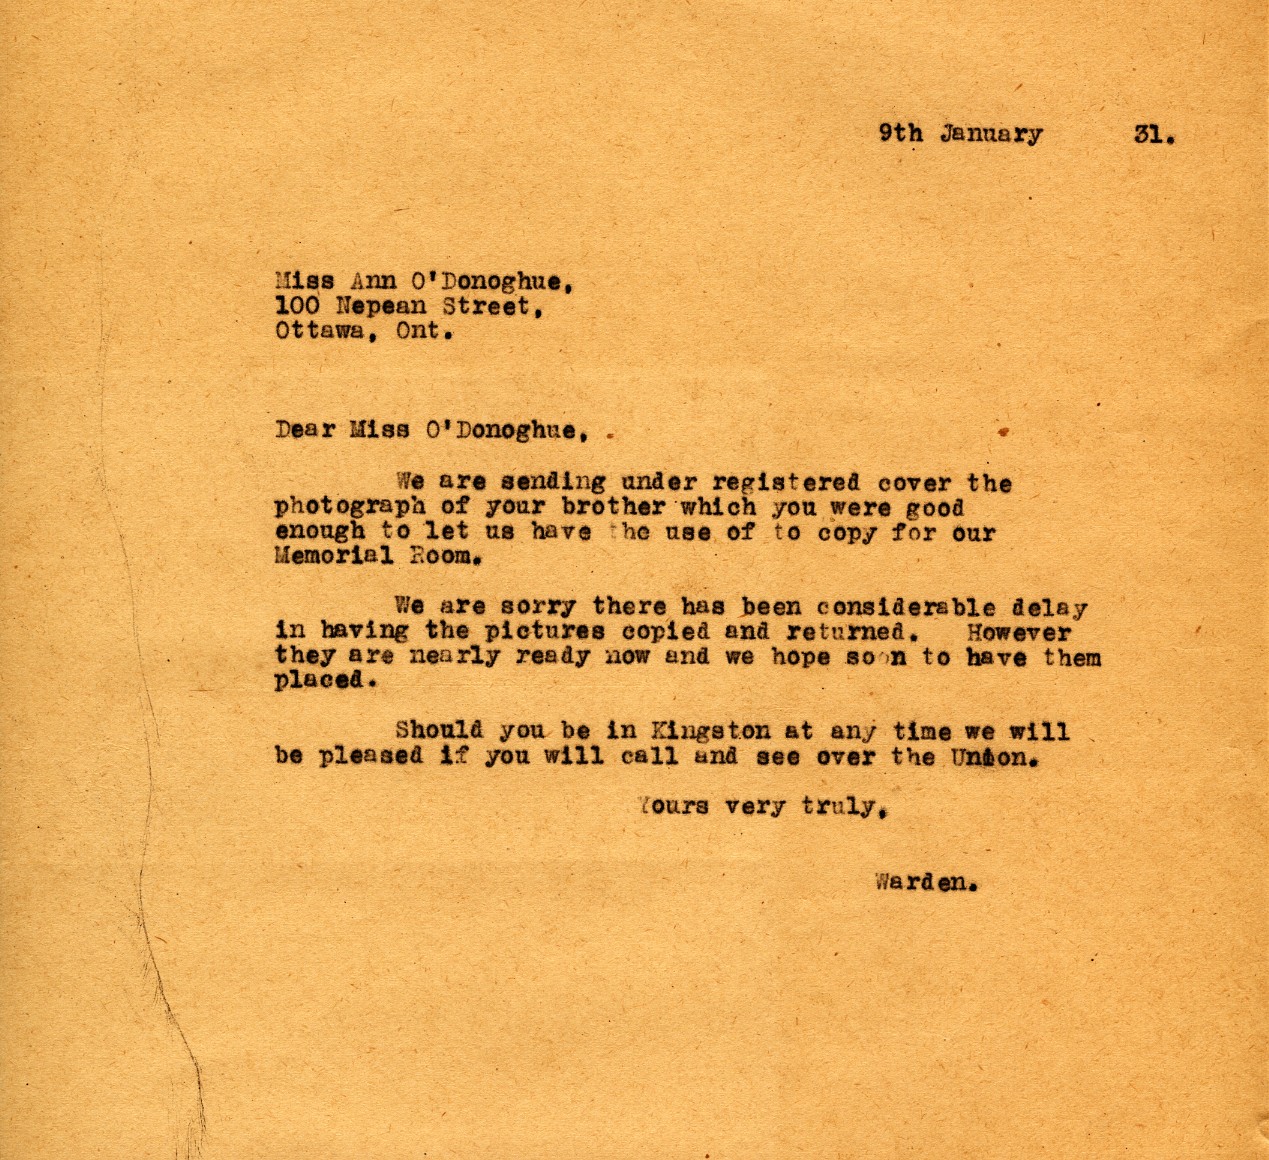 Letter from the Warden to Miss Ann O'Donoghue, 9th January 1931